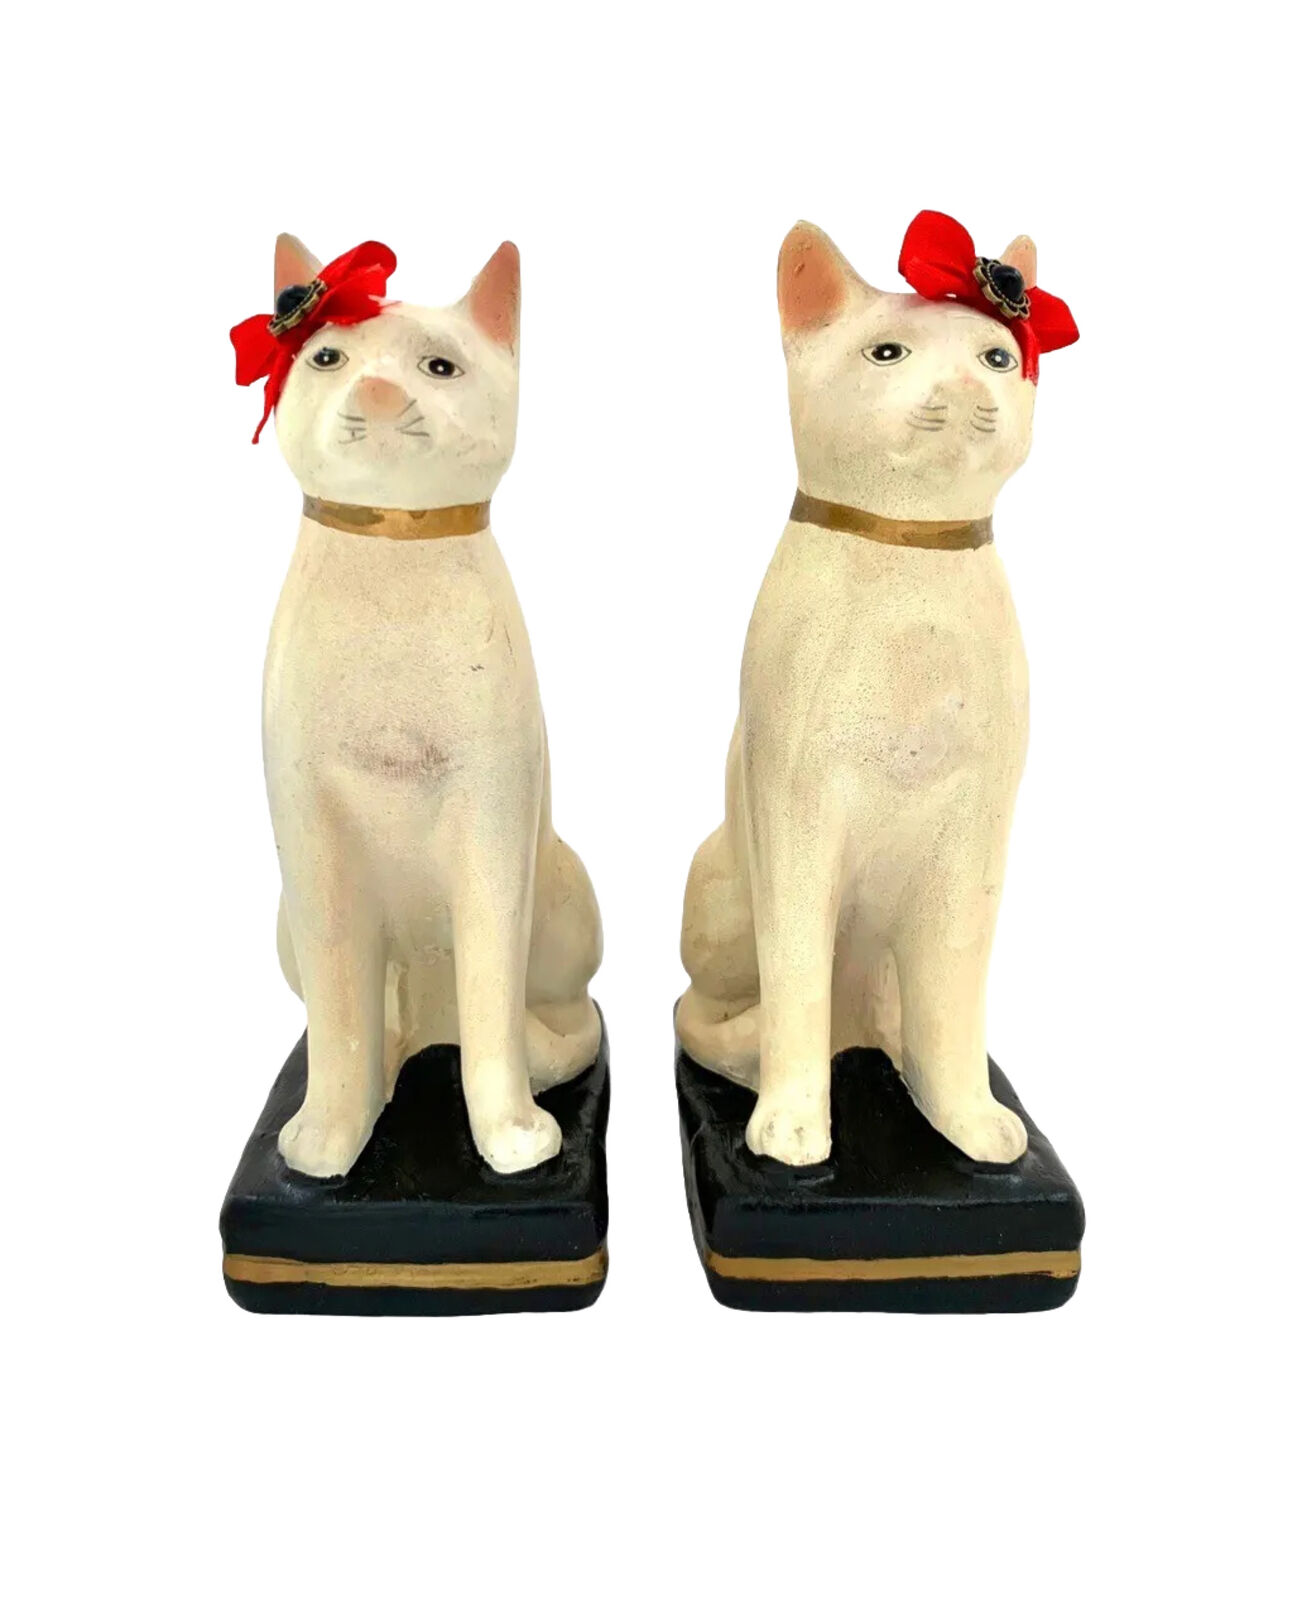 Cat Bookend Pair Cute Figurine with Bow Vintage Decor Gift